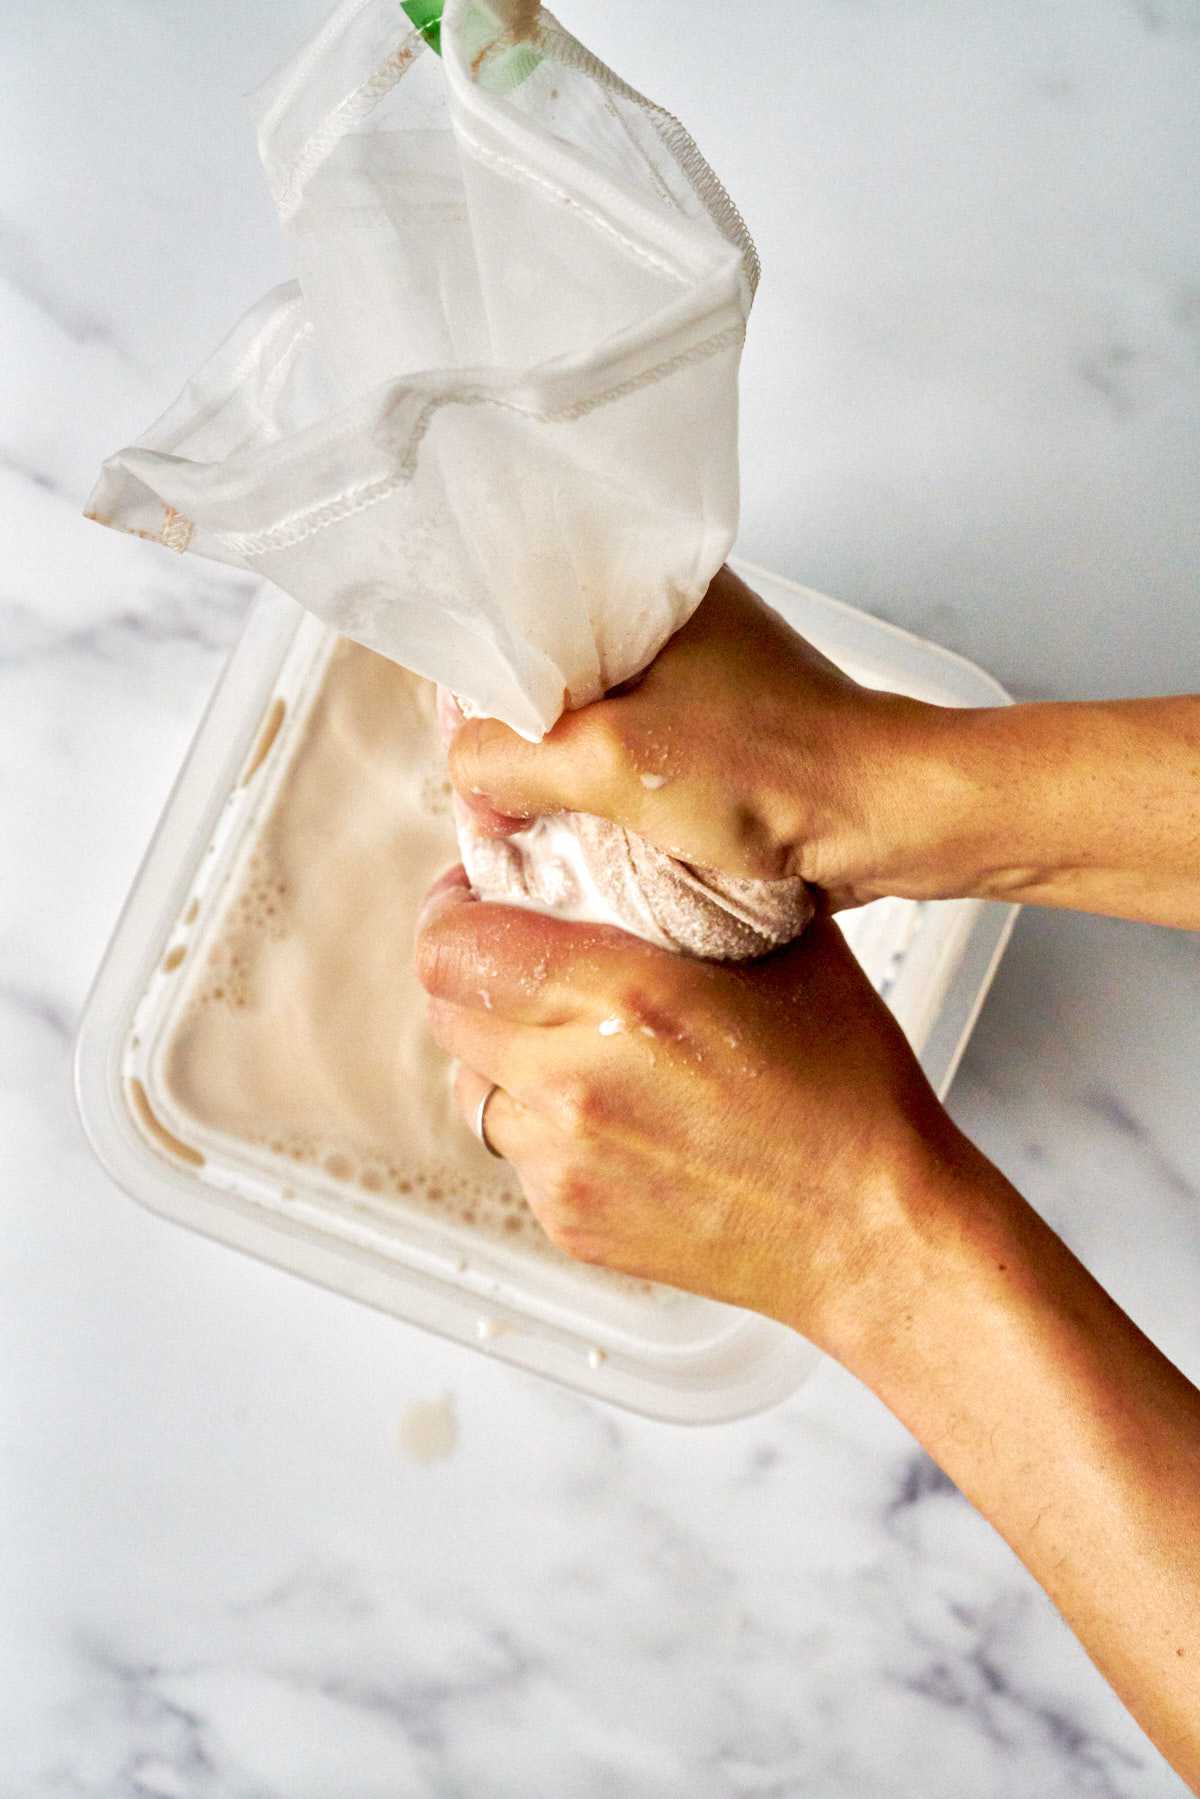 Squeezing nut milk into a square bowl.